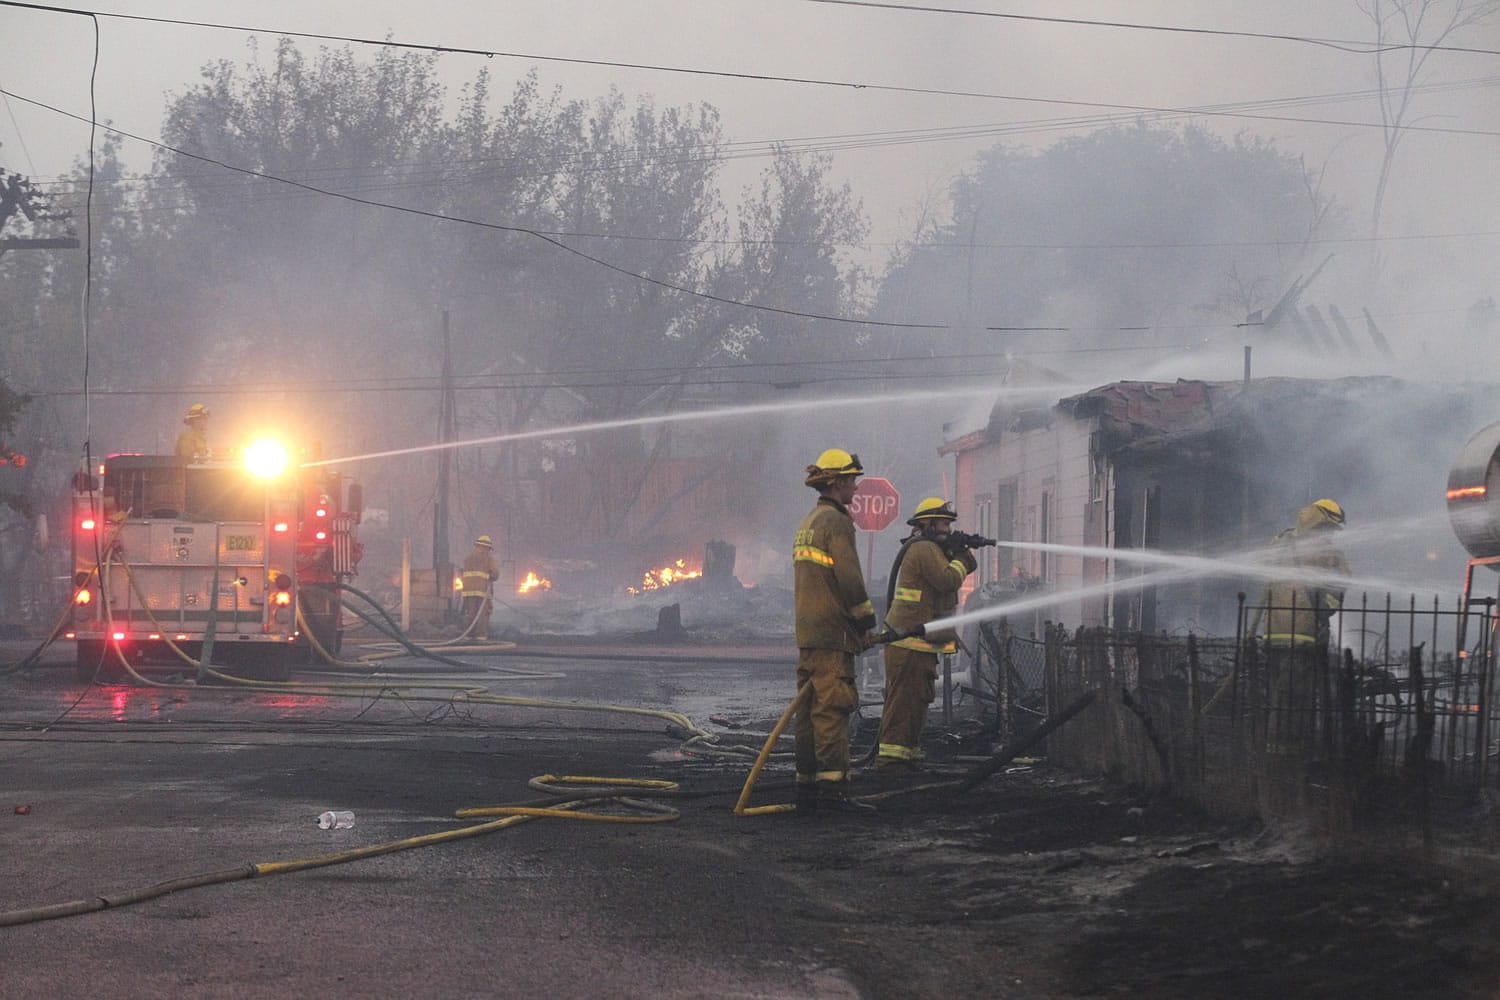 Firefighters work to put out fires and protect structures along Center Street on Monday in Weed, Calif.